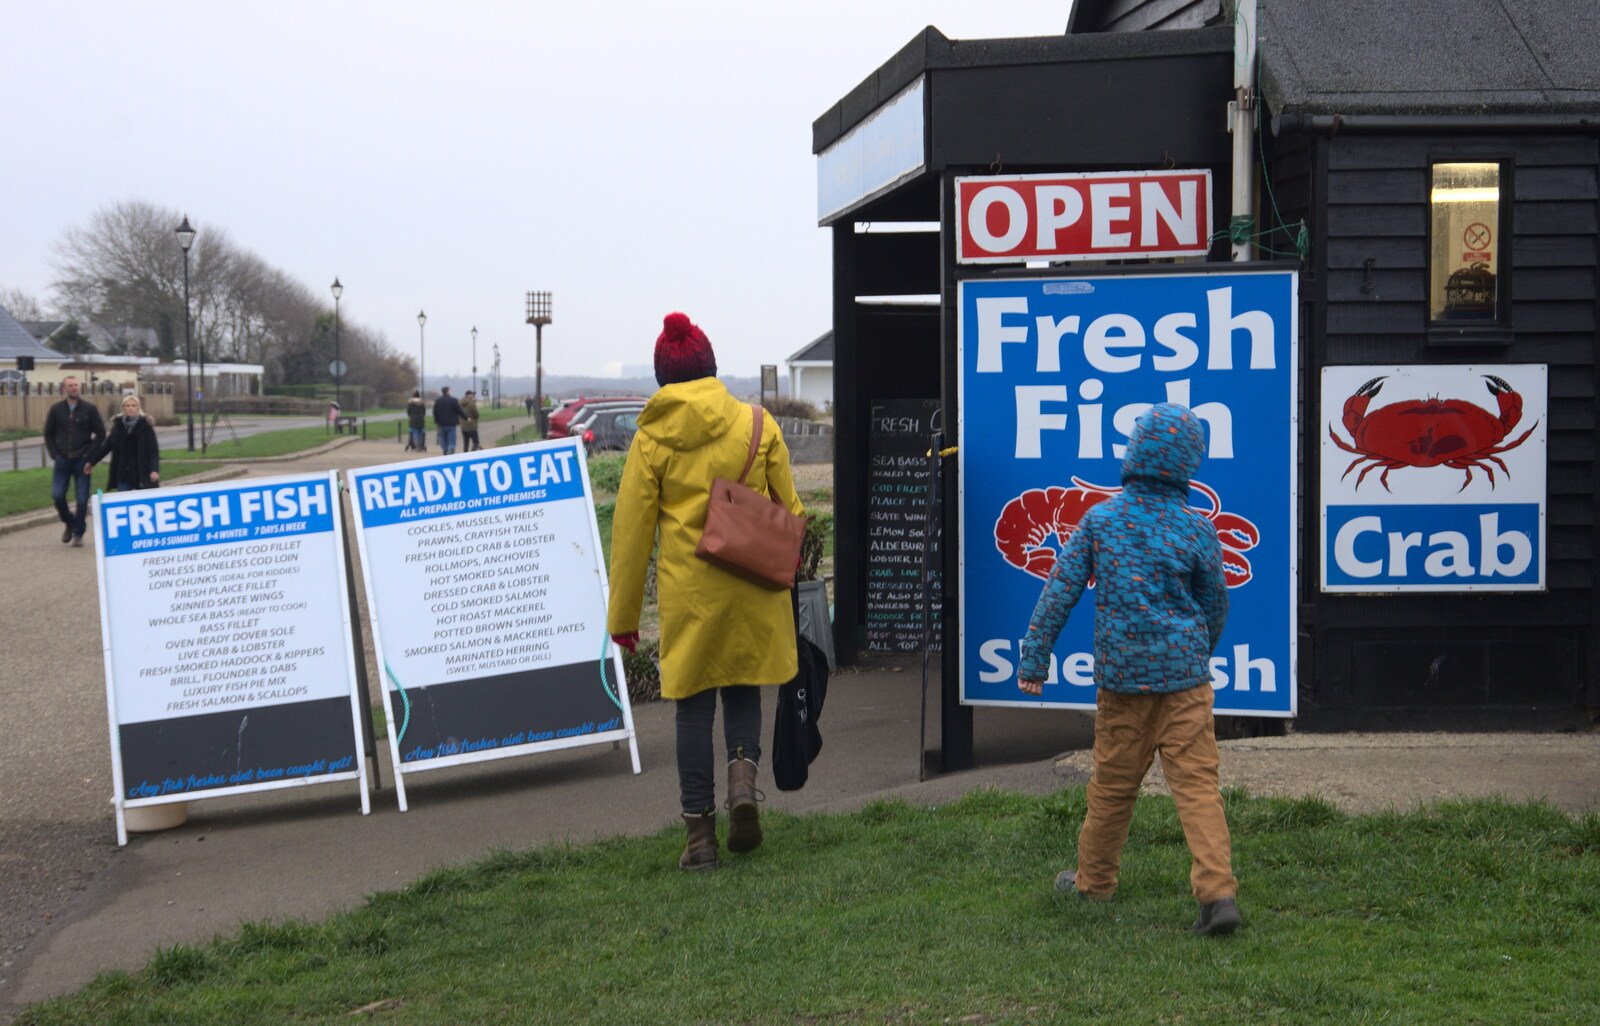 Outside the Aldeburgh fish stall from A Postcard from Aldeburgh, Suffolk - 6th January 2019